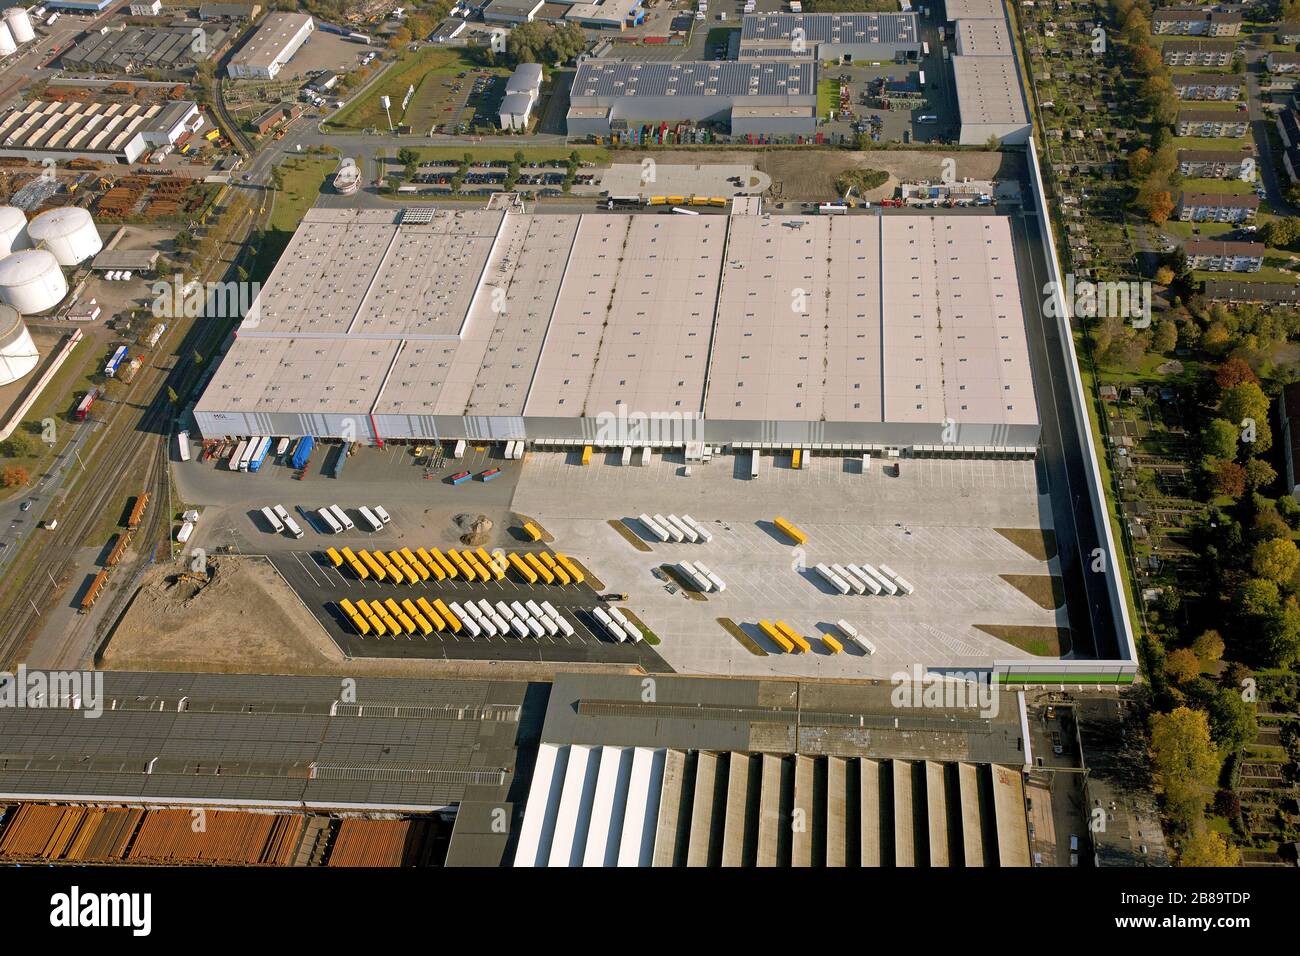 Hamm From The Air High Resolution Stock Photography and Images - Alamy